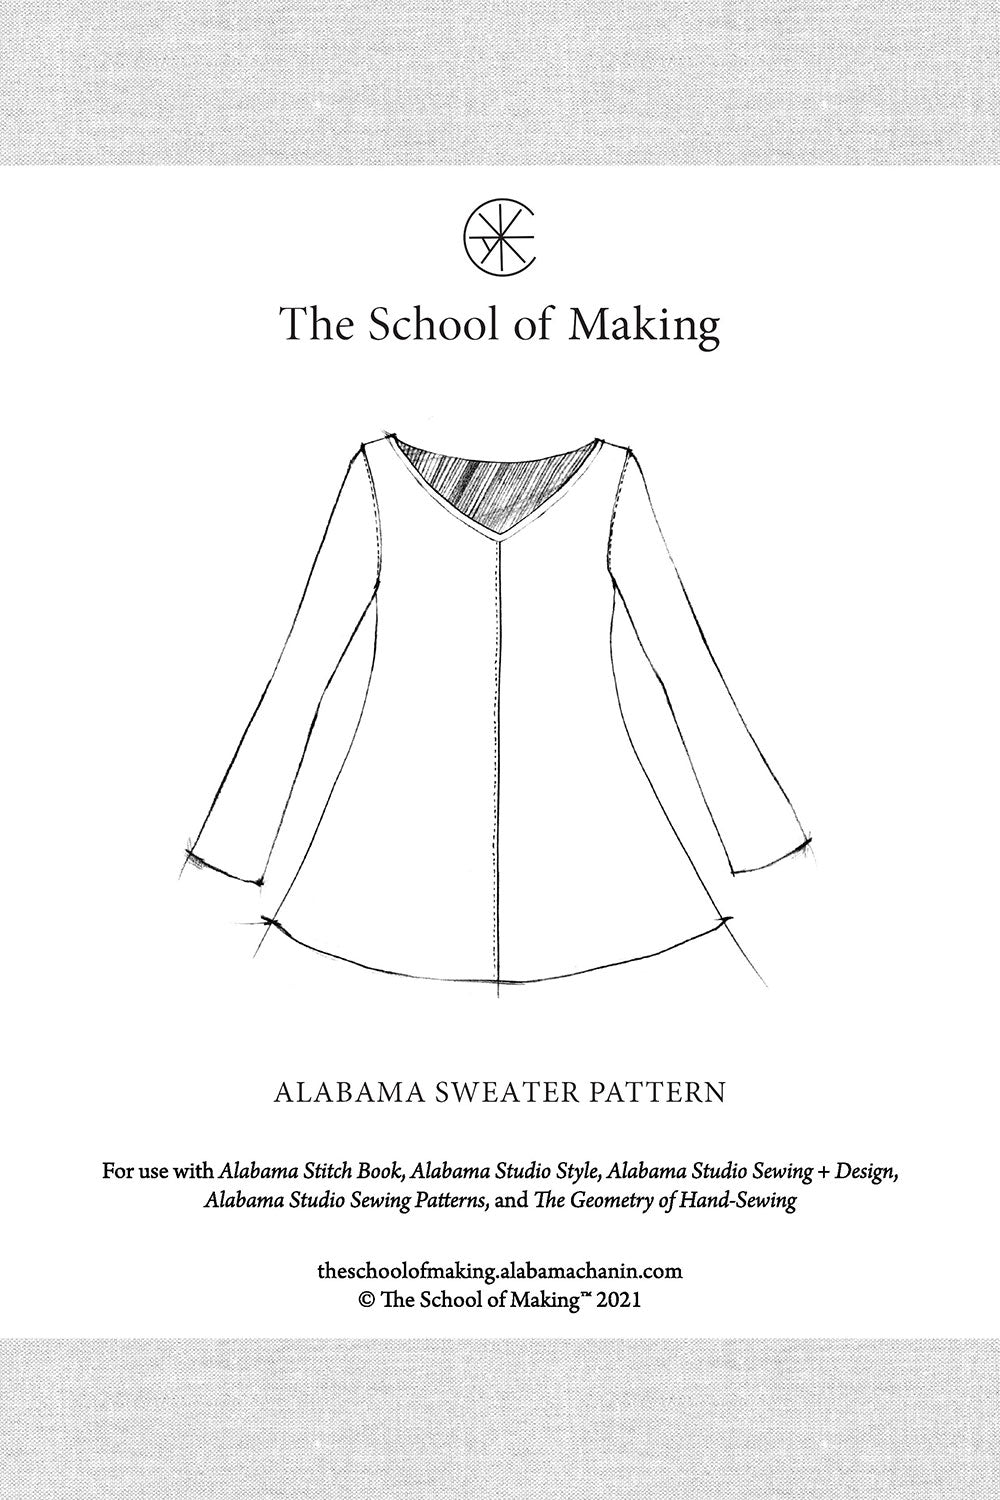 The School of Making Alabama Sweater Pattern Sewing Pattern for Hand-Sewing Clothing